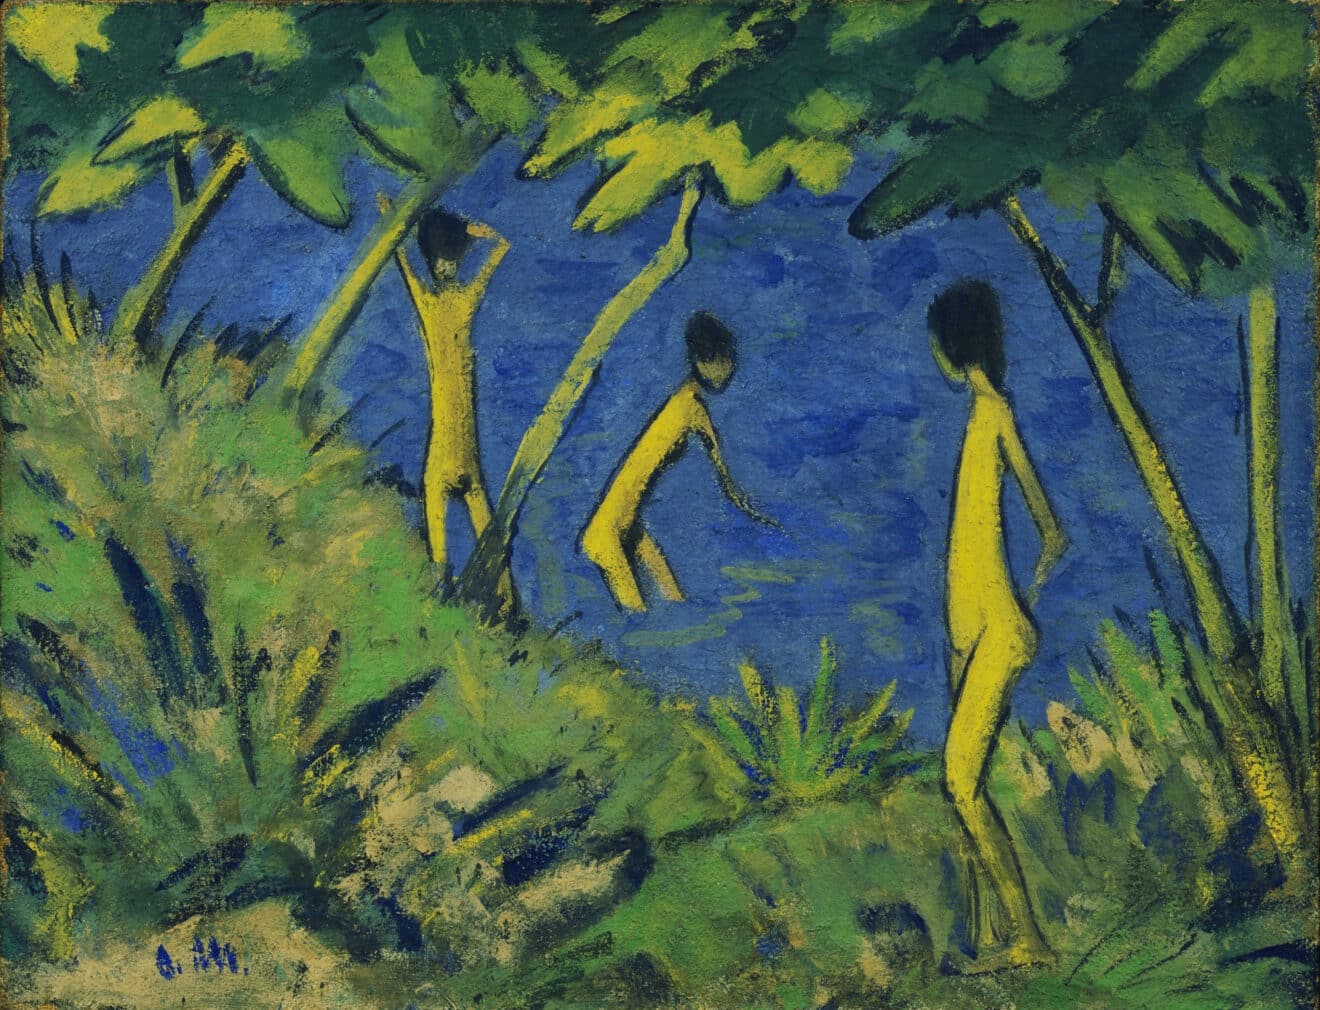 Nude paintings in nature- Otto Mueller, Landscape with Yellow Nudes (Landschaft Mit Gelben Akten), ca. 1919, Museum of Modern Art, New York, NY, USA.